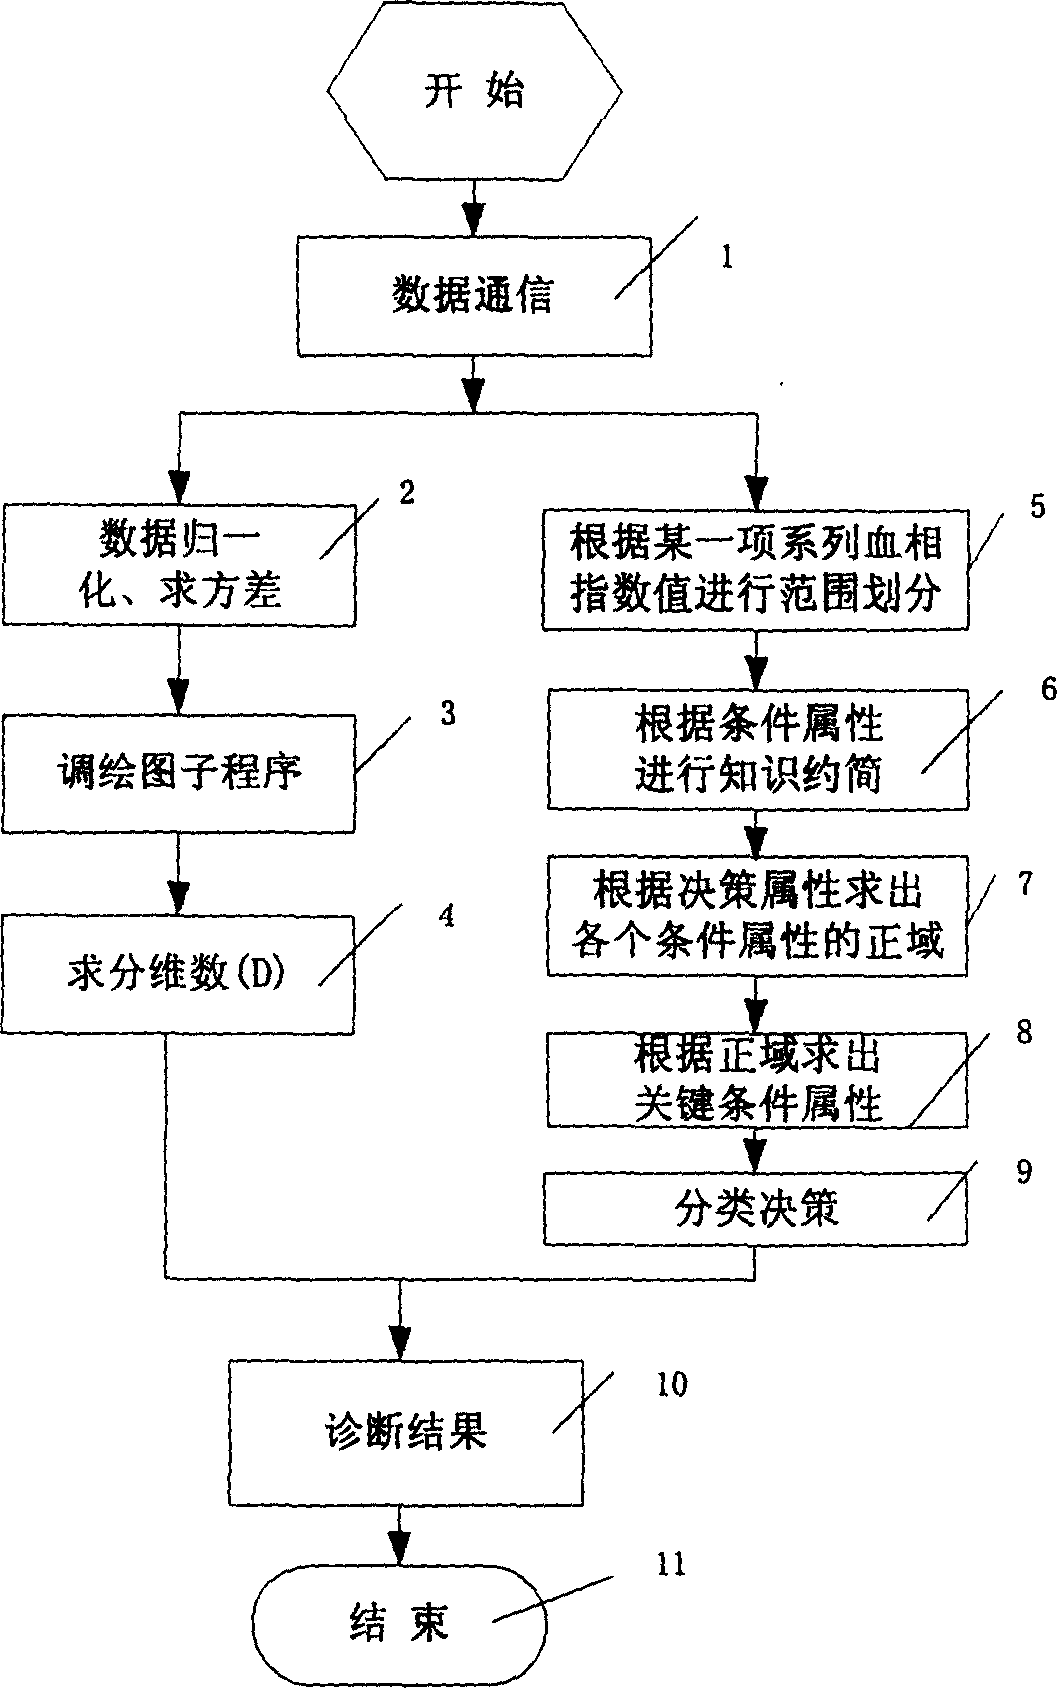 Whole blood multi-parameter biochemical medical auxiliary diagnostic method